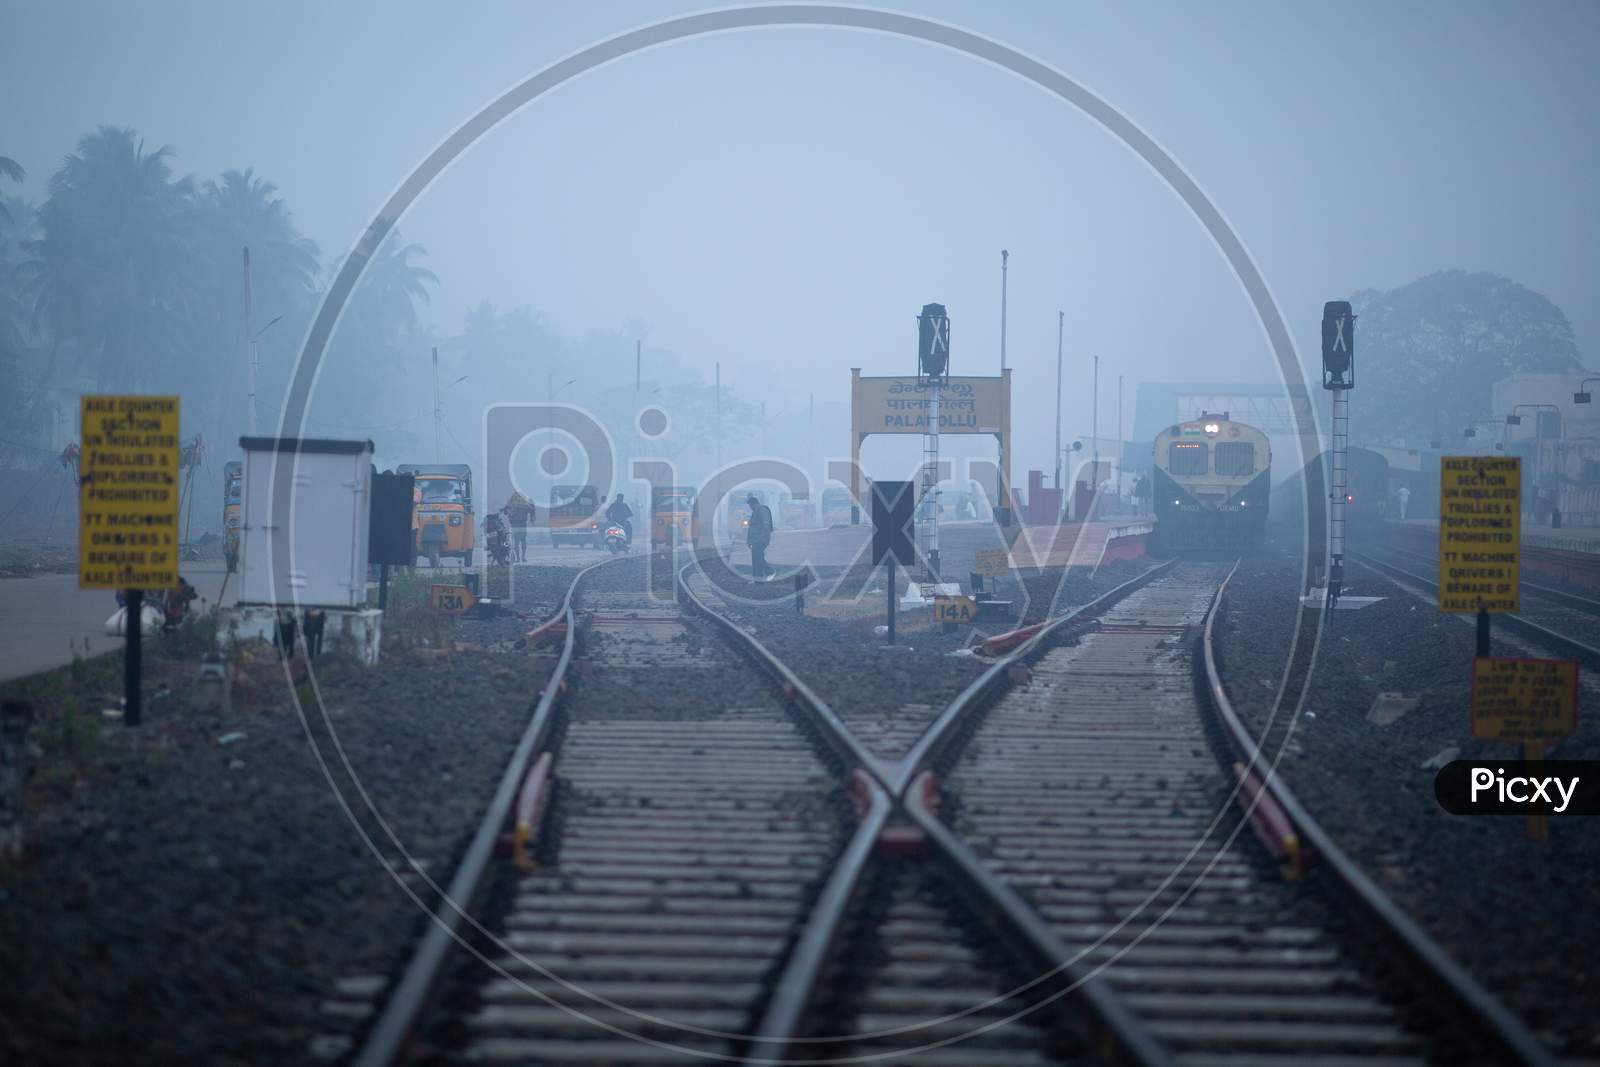 View of intersection of Railway Tracks in Palakollu during heavy fog